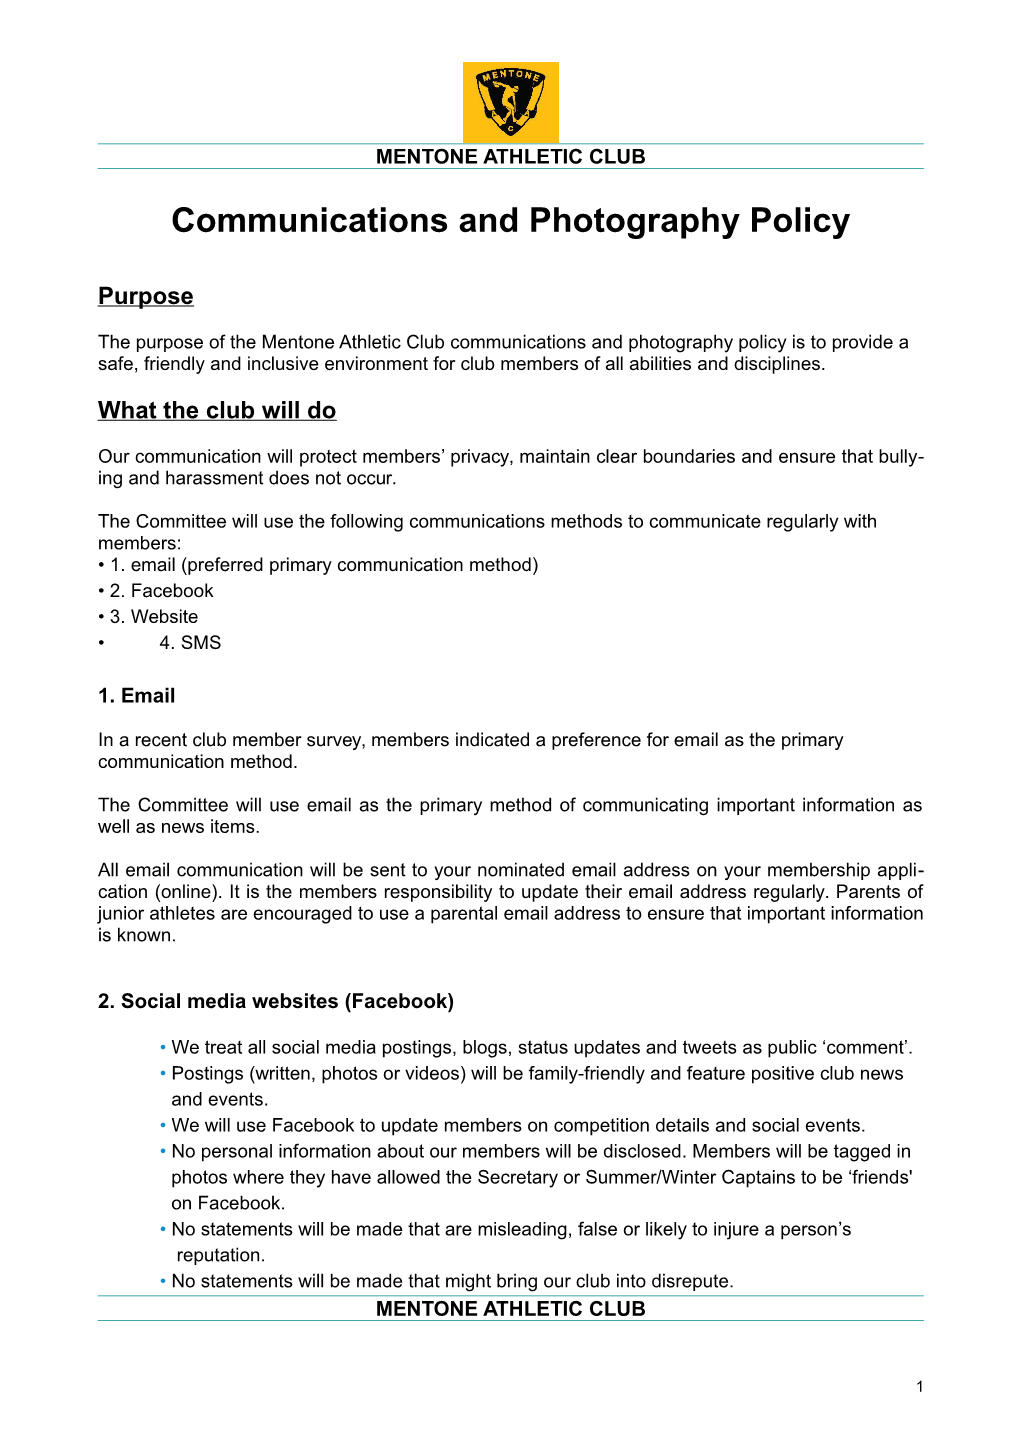 Communications and Photography Policy